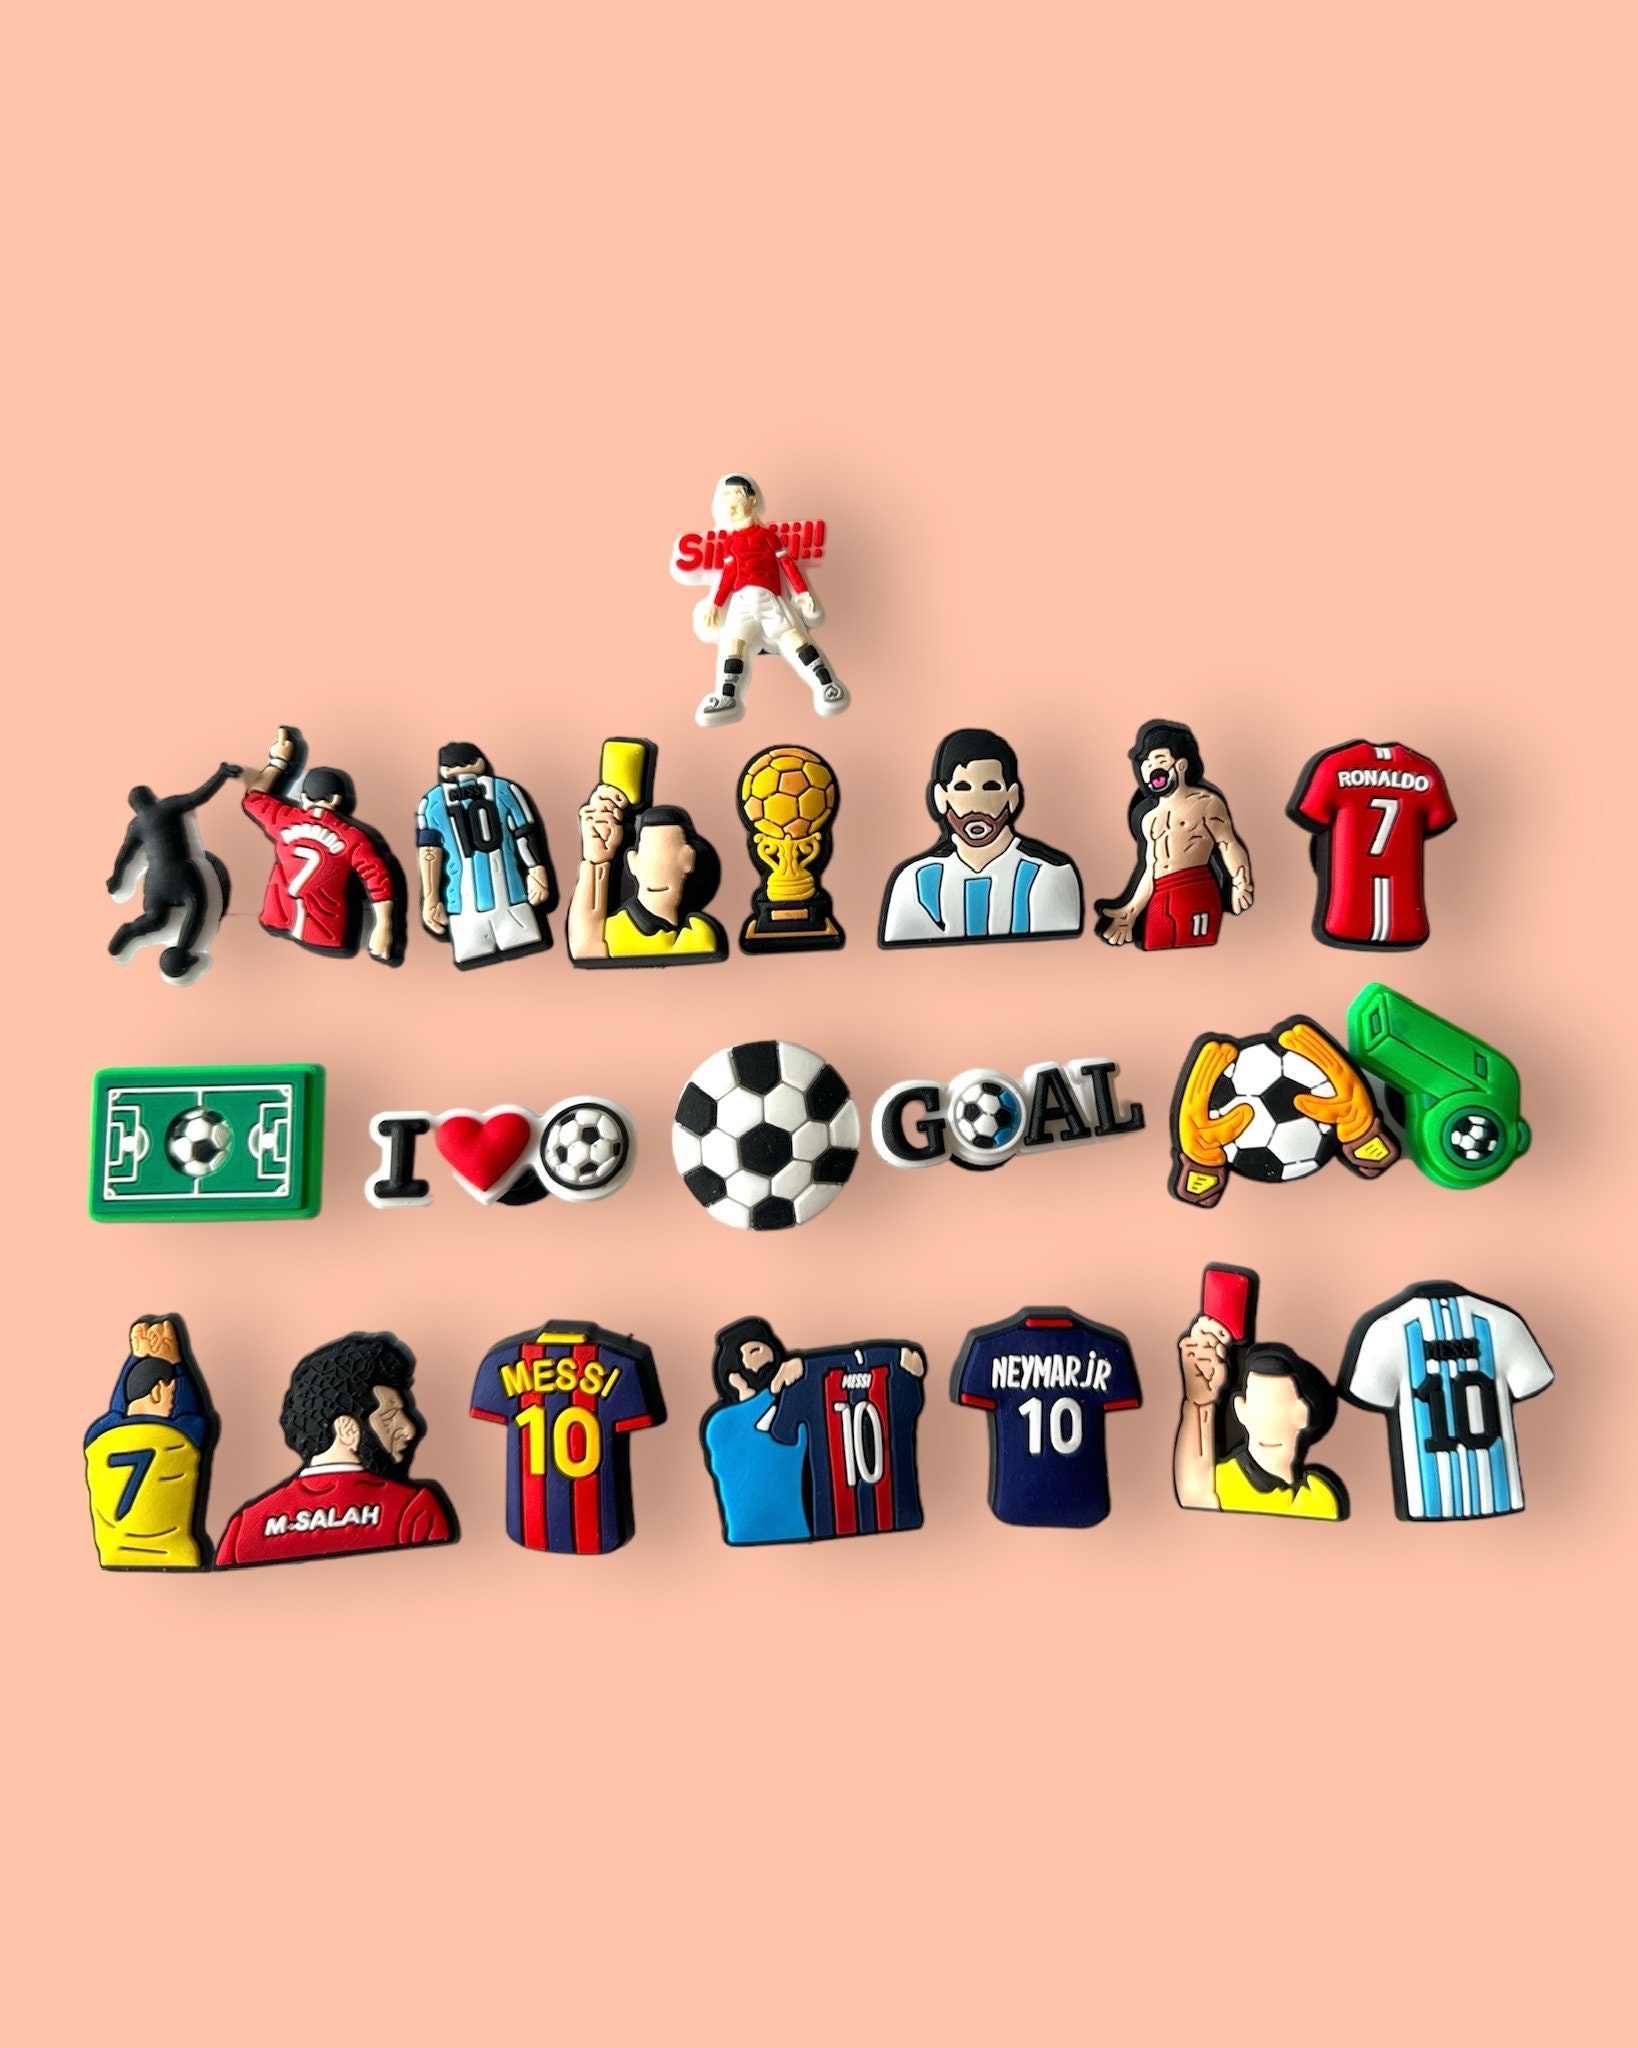 Bundle of Messi Croc Charms, Messi Jibbitz charms. Inspired by Messi.  Futbol